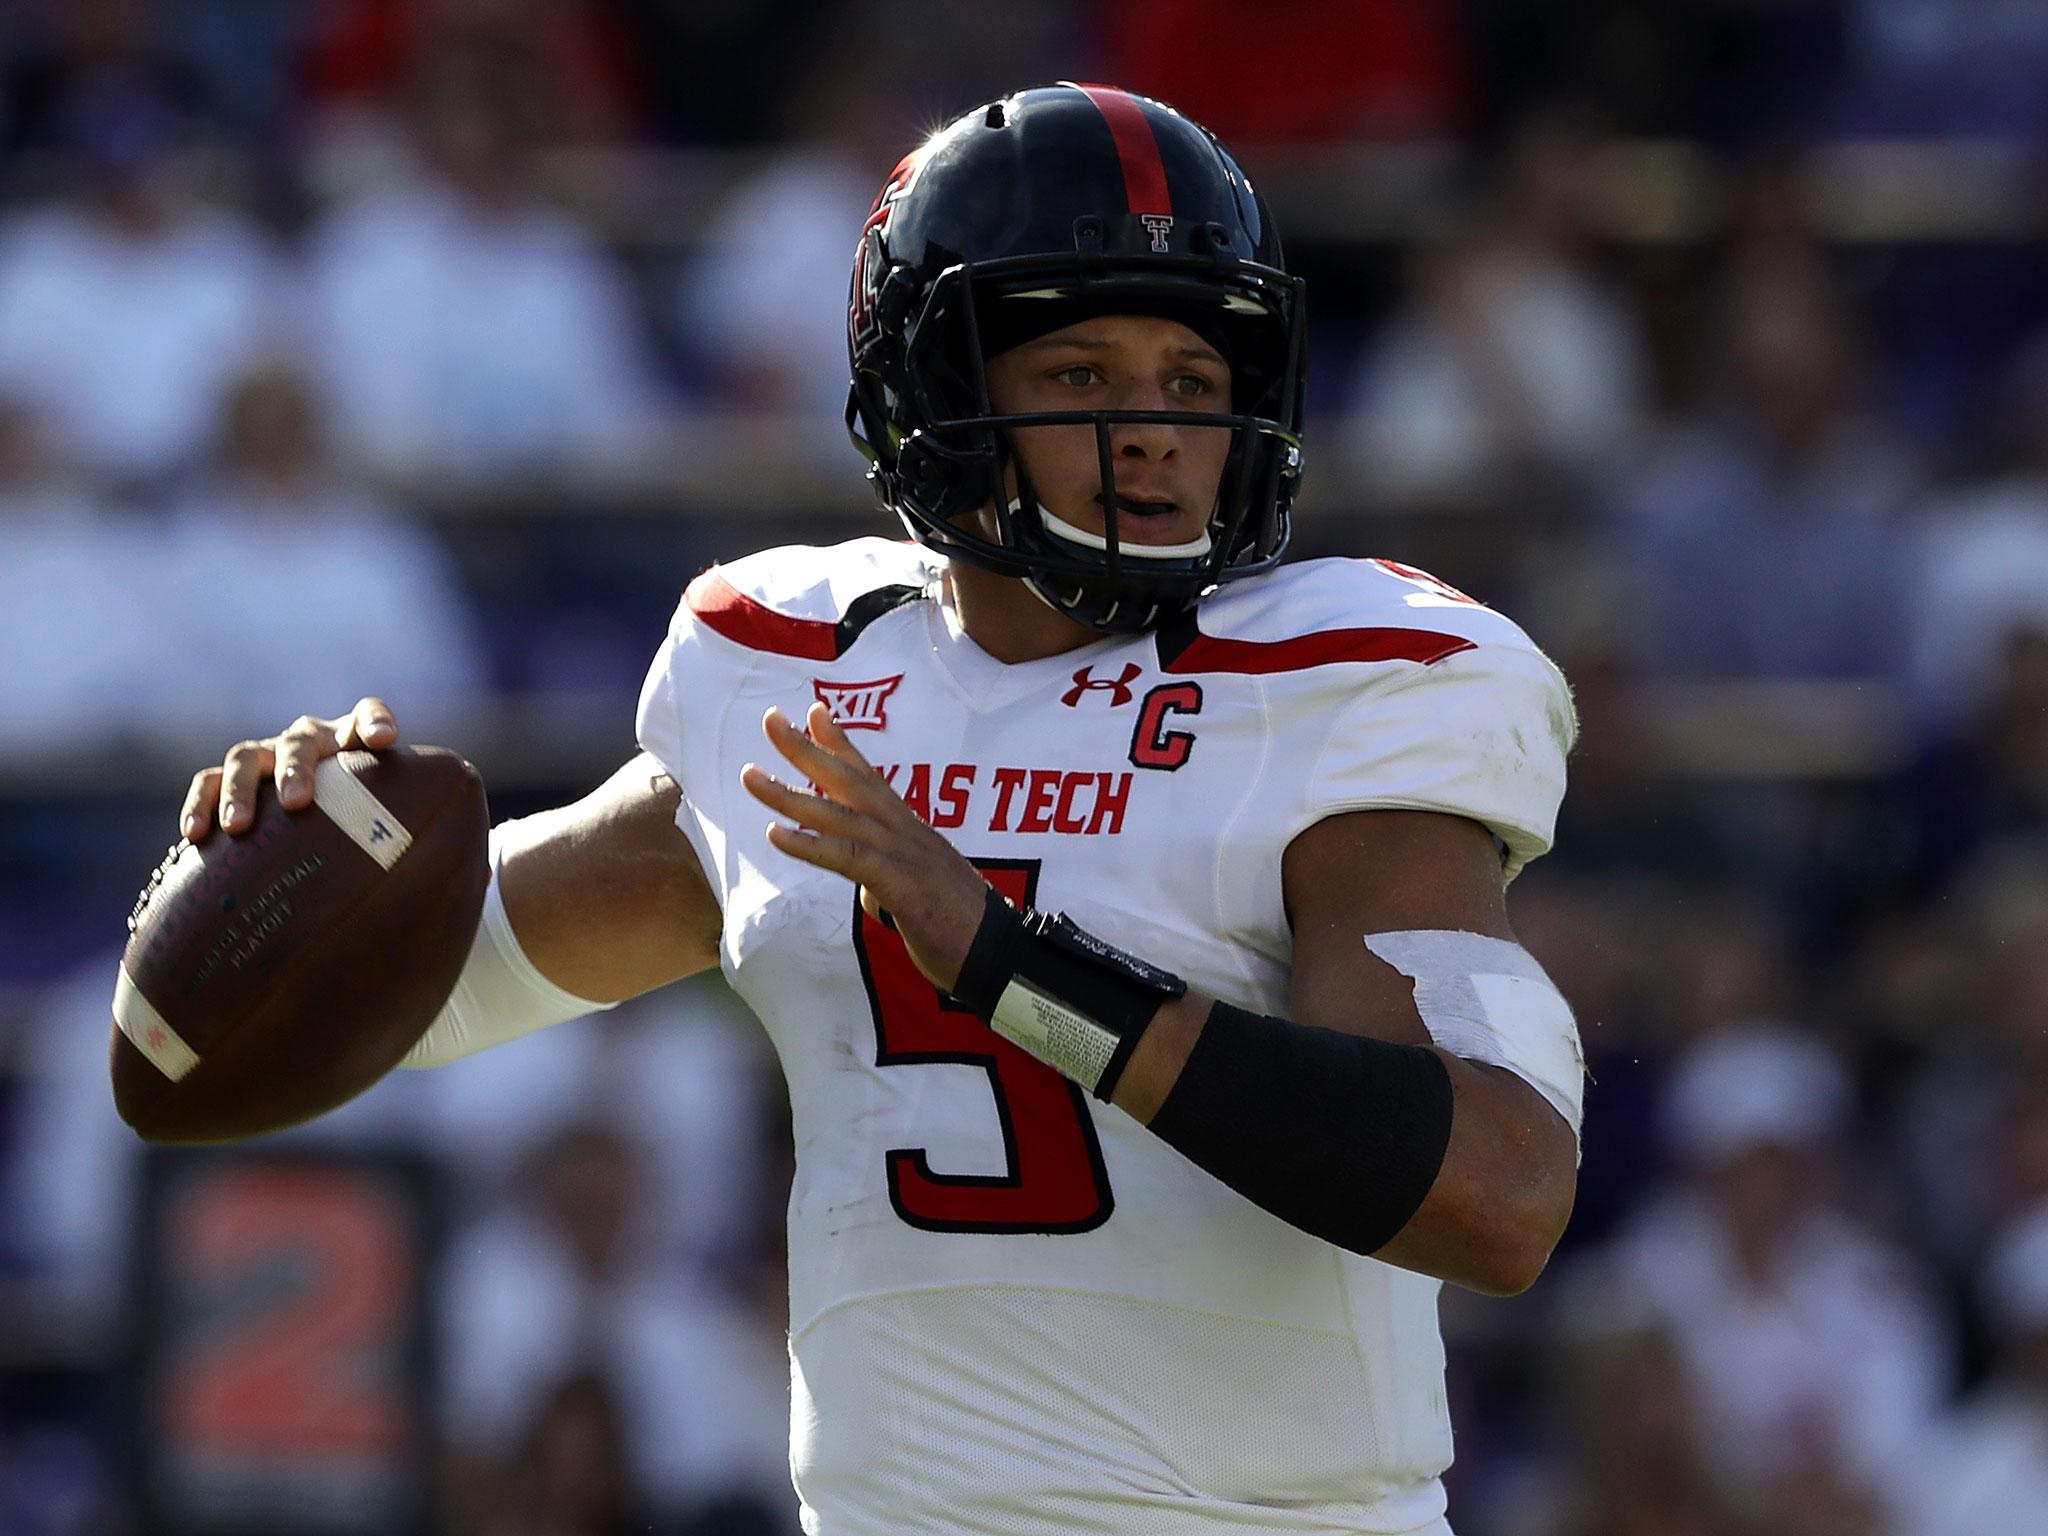 Patrick Mahomes could be the top QB but is a work in progress